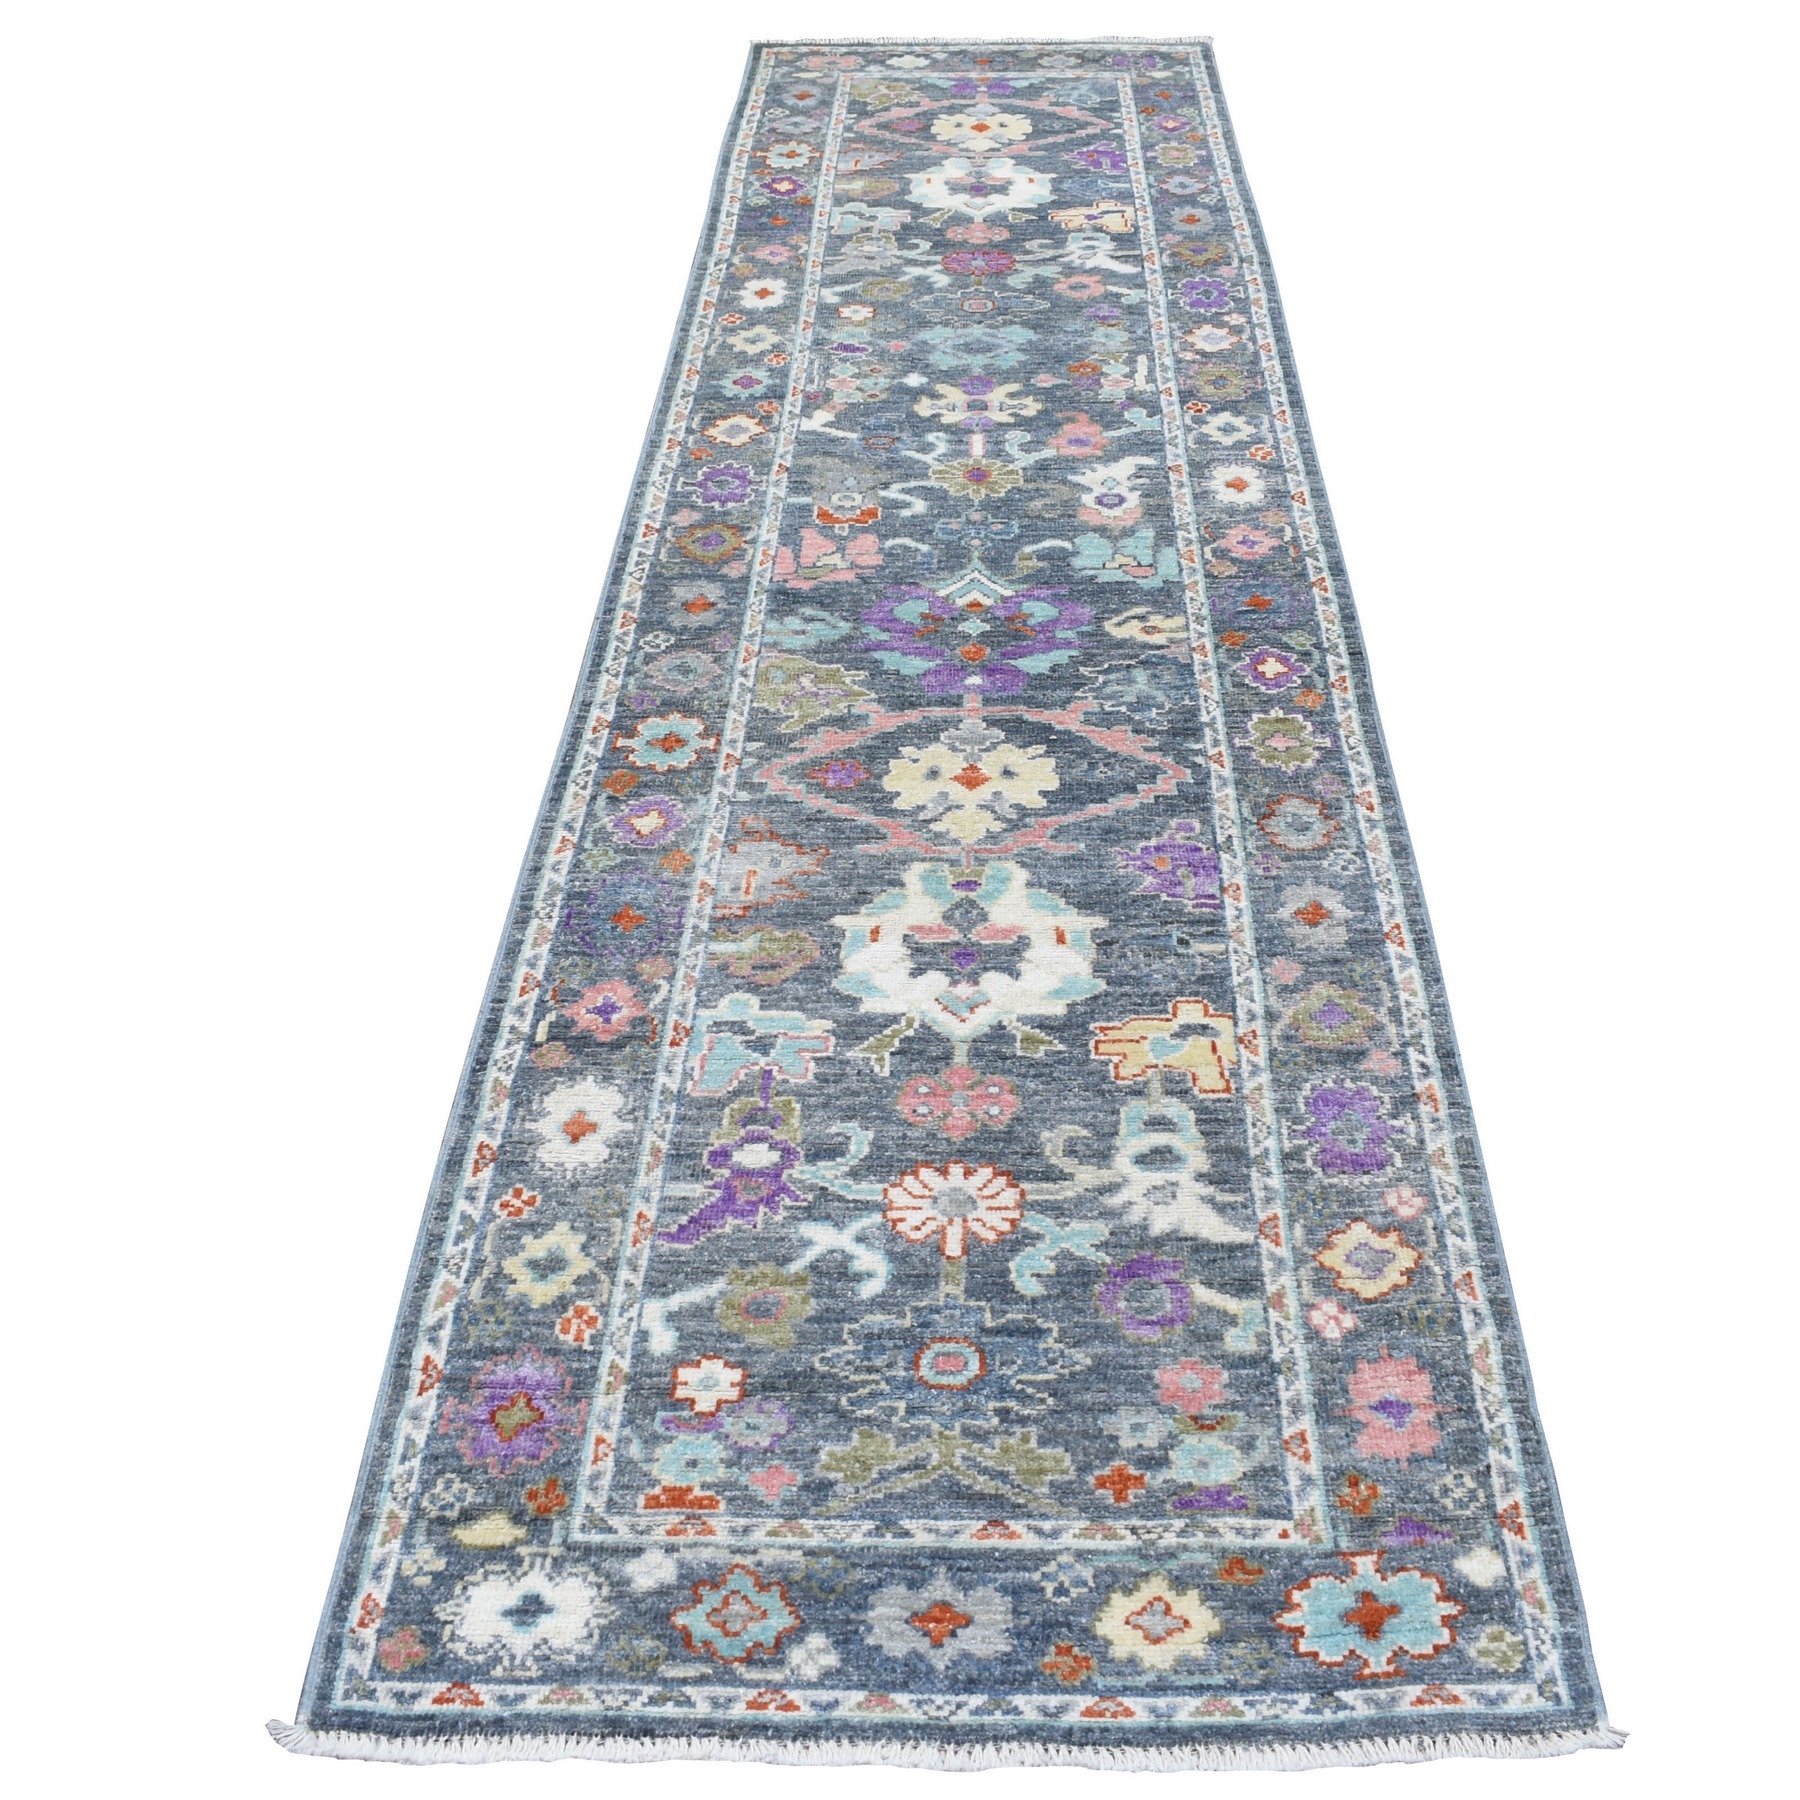 3'x11'7" Hand Woven Gray Angora Oushak In A Colorful Palette 100% Wool Oriental Runner Rug 